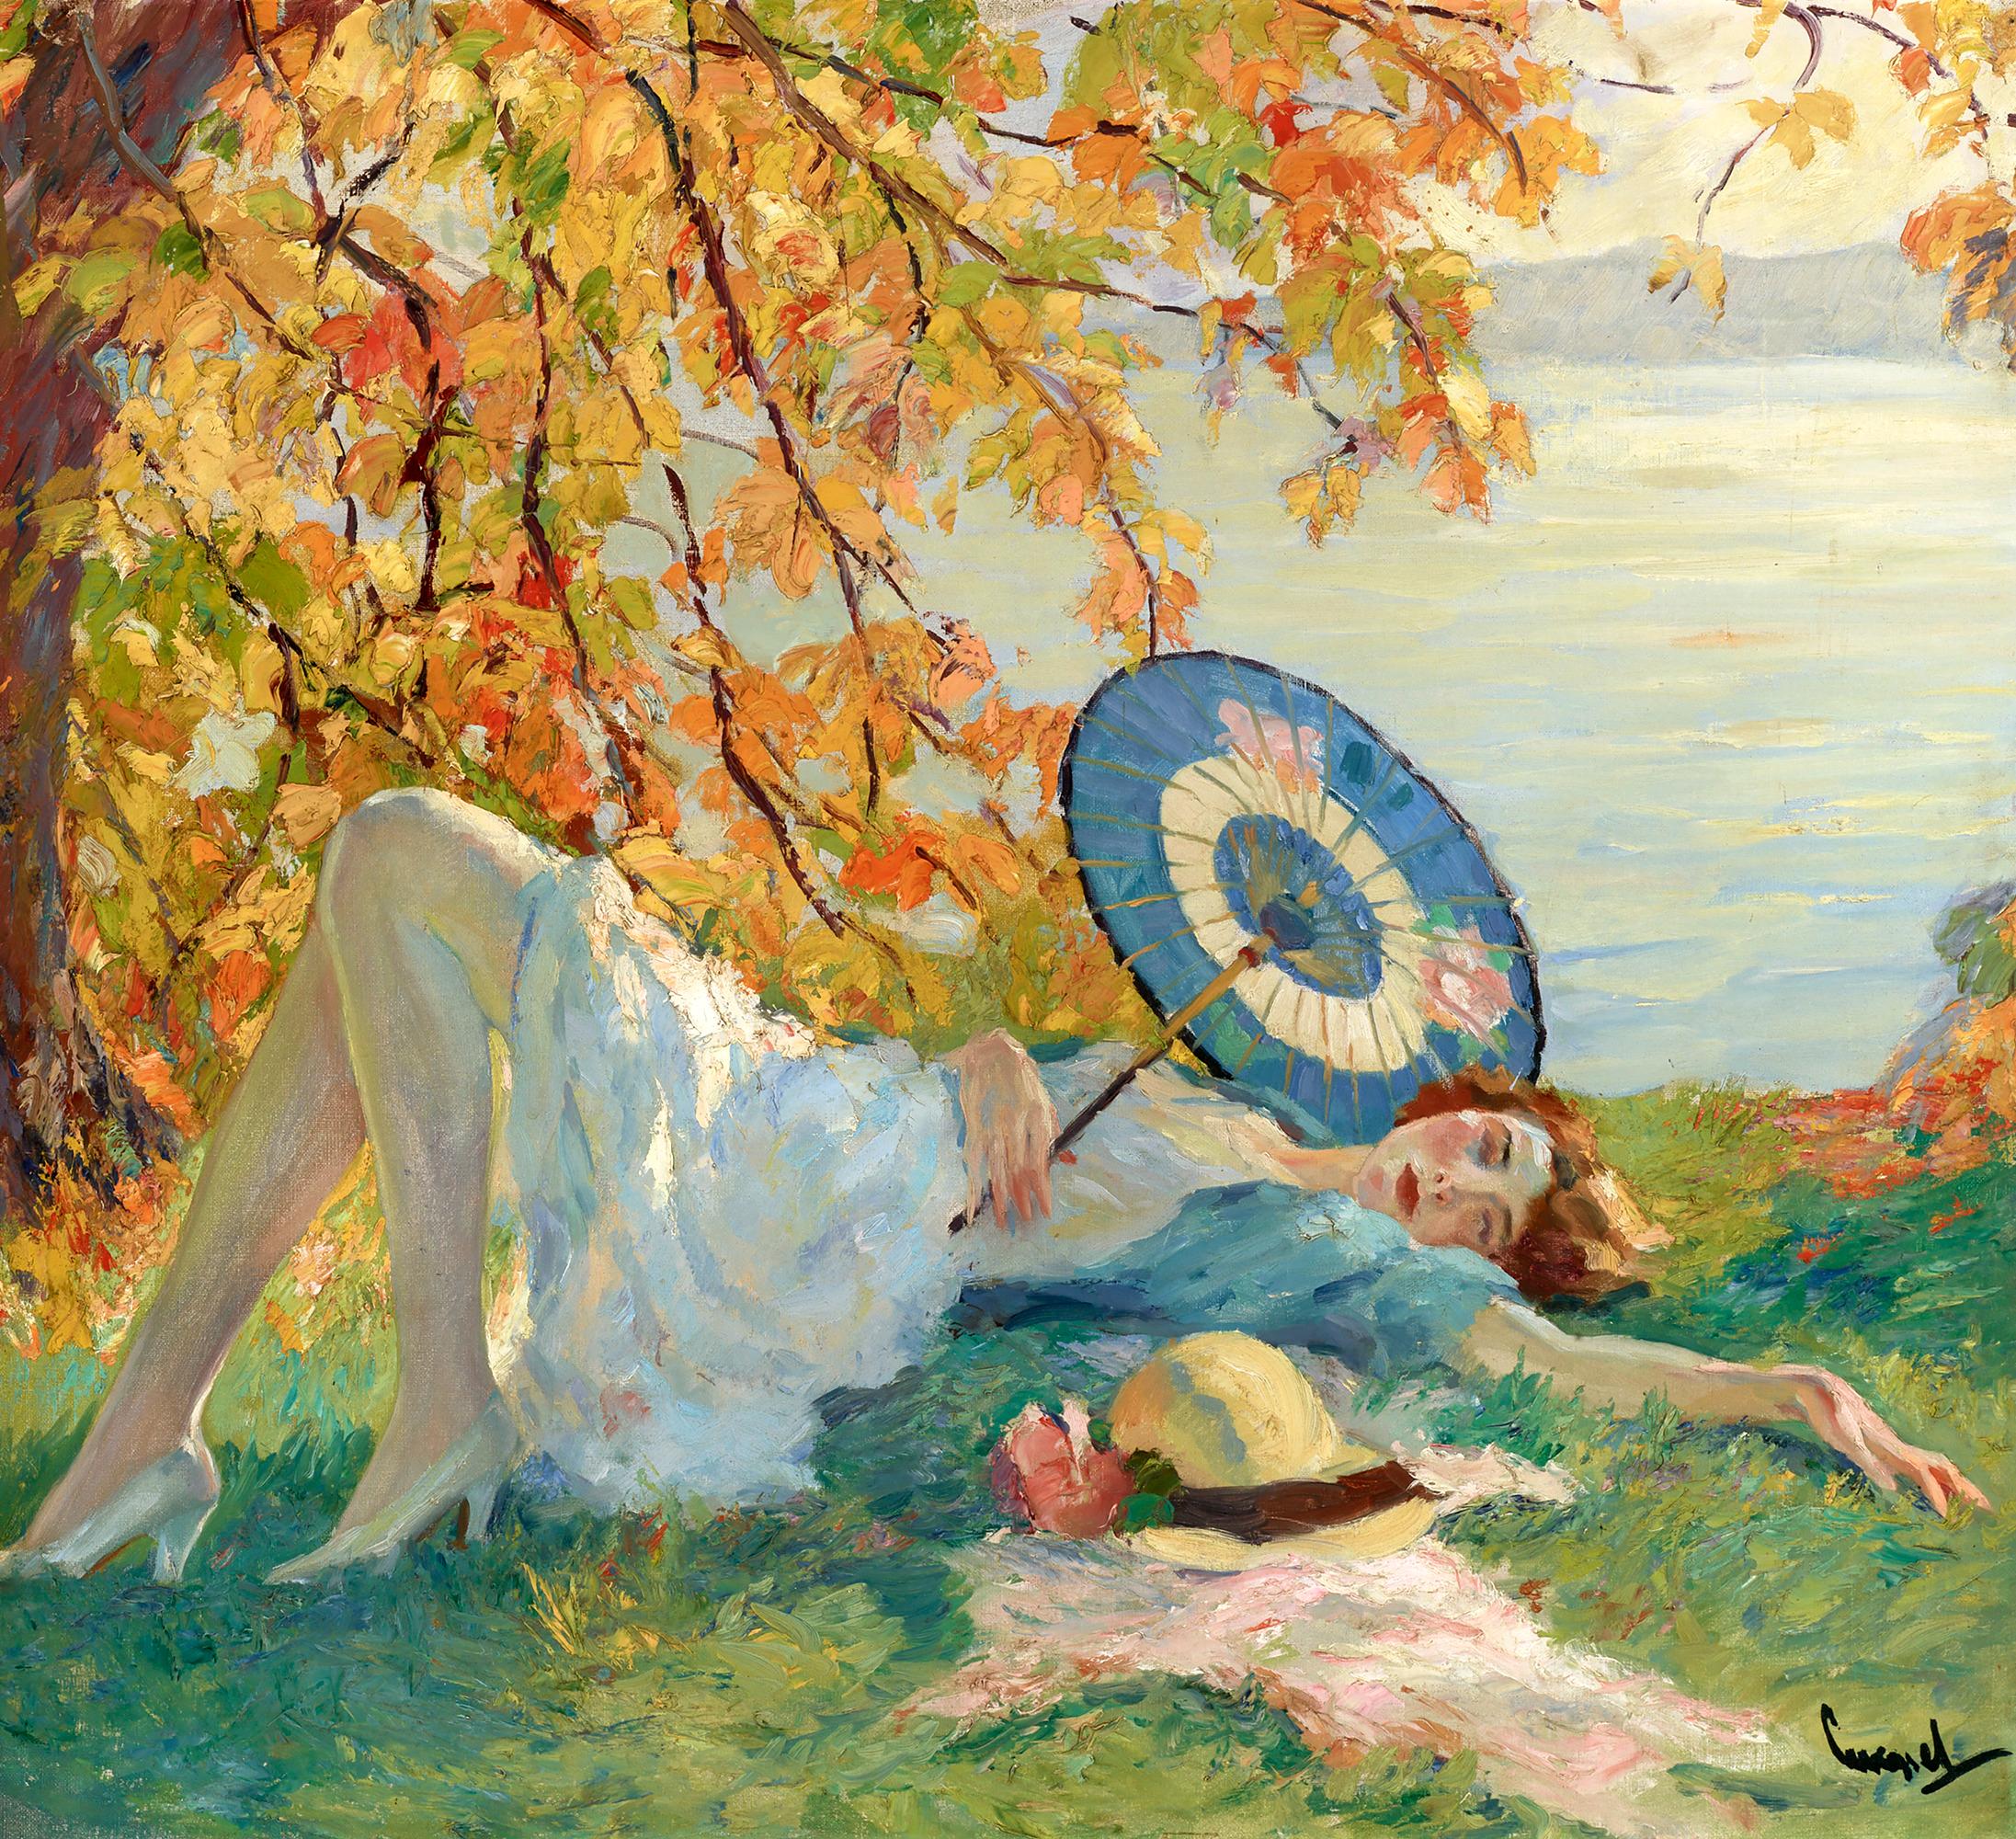 Edward Cucuel Portrait Painting - Woman Reclining by a Lake